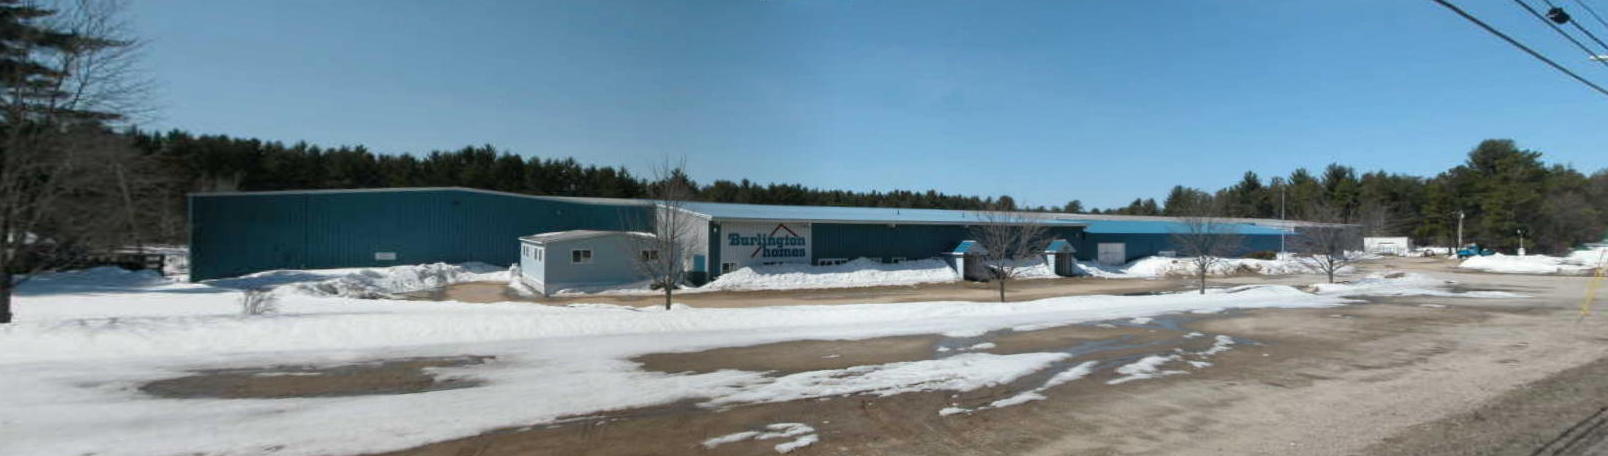 81,100+/- SF Manufacturing Facility - 13.5+/- Acres Auction